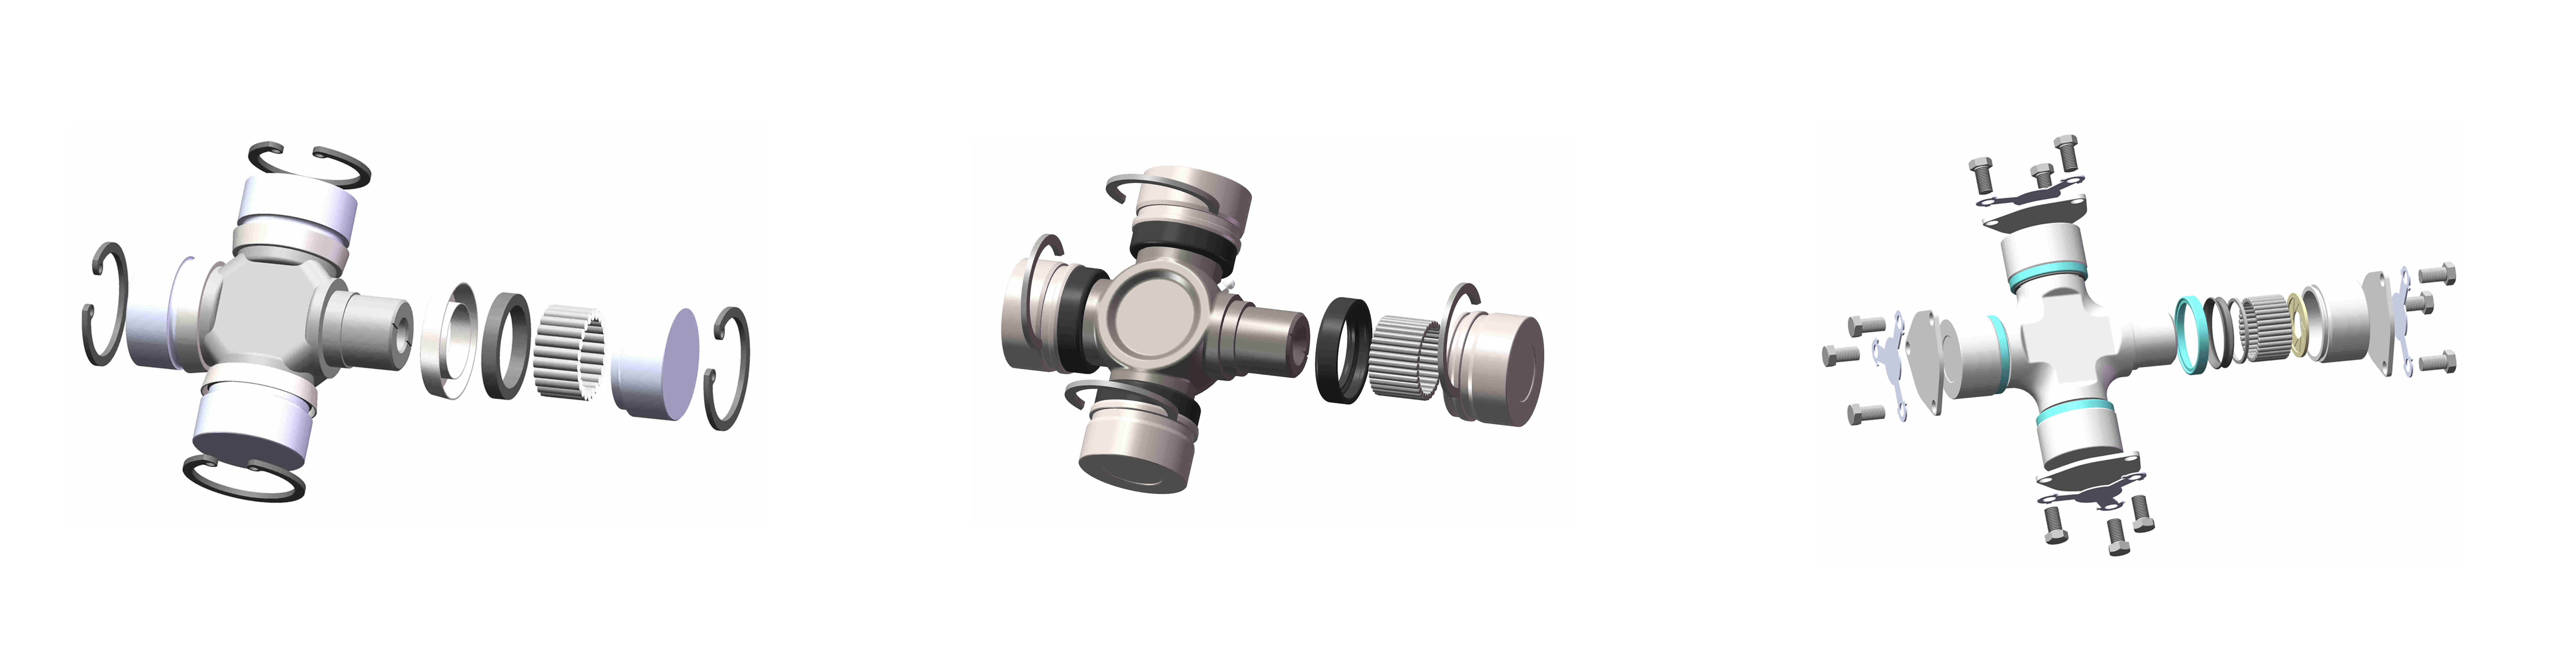 we can produce more than 1000 kinds of universal joint